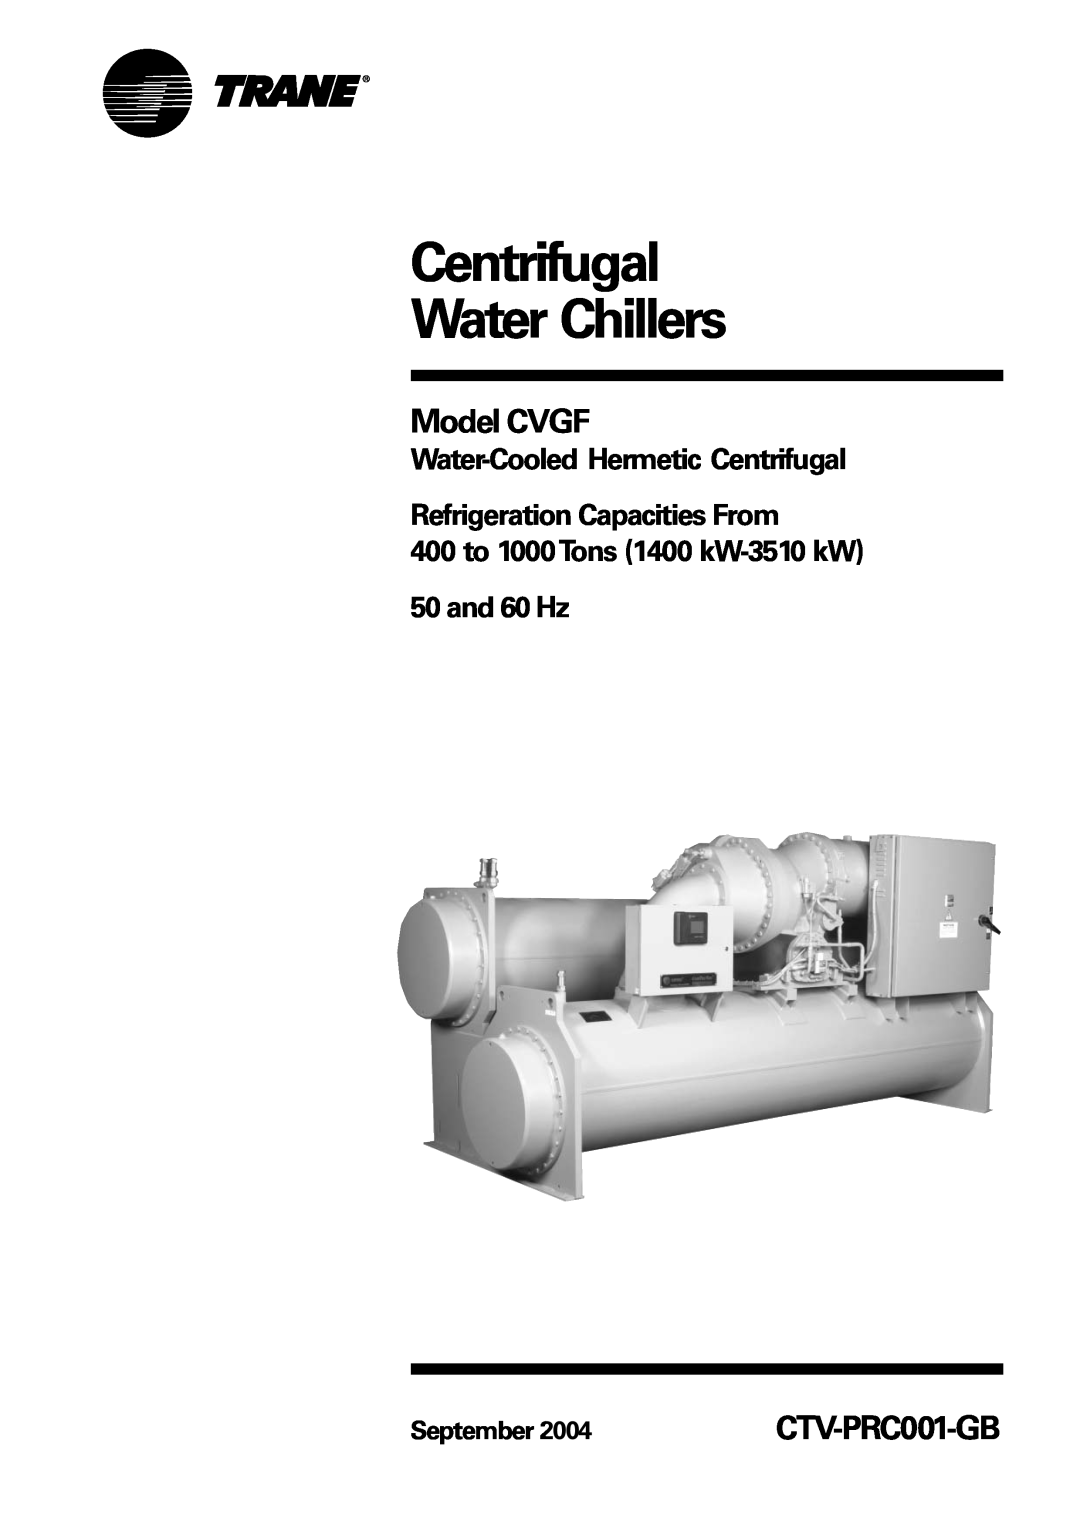 Trane manual Model CVGF, Centrifugal Water Chillers, CTV-PRC001-E4, 400 to 1000 Tons 1400～3510 kW 50 and 60 Hz, October 